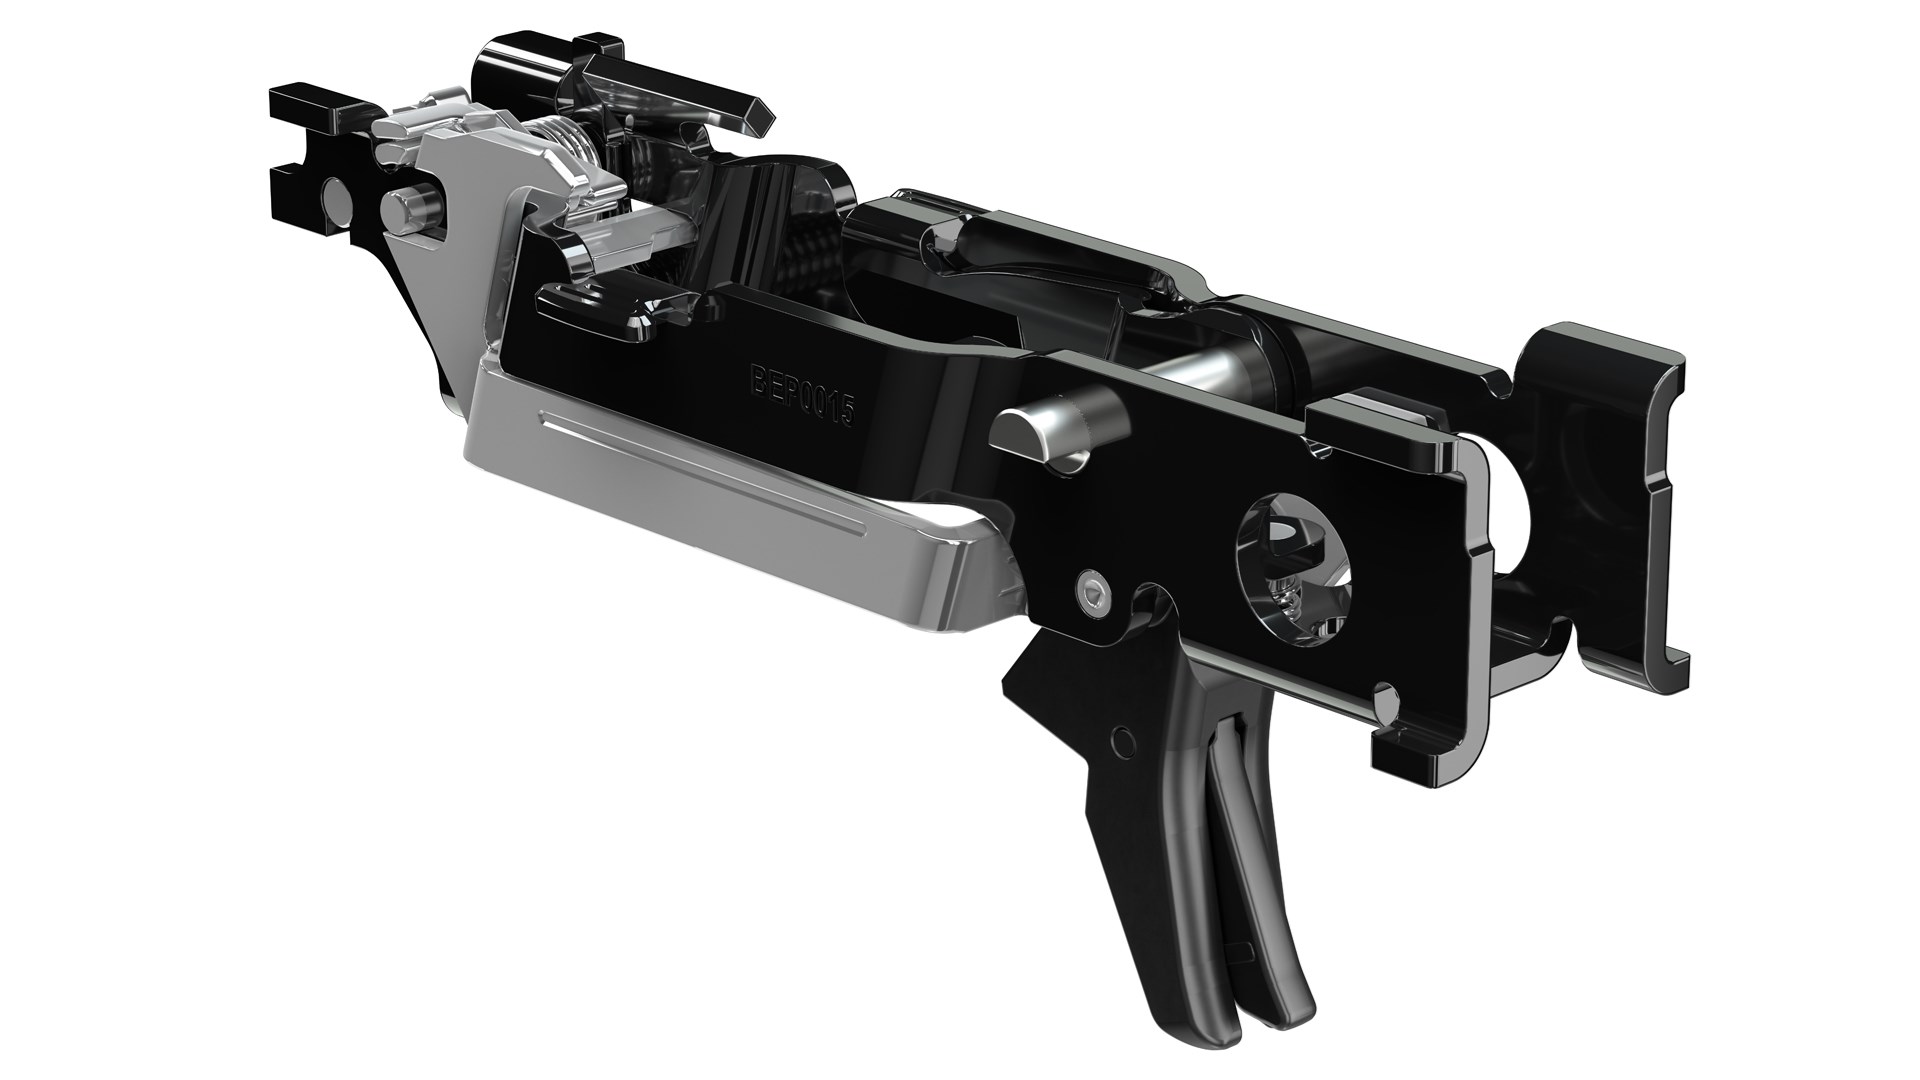 The metal chassis of the Springfield Armory Echelon, with an all-black trigger and a silver trigger bar.